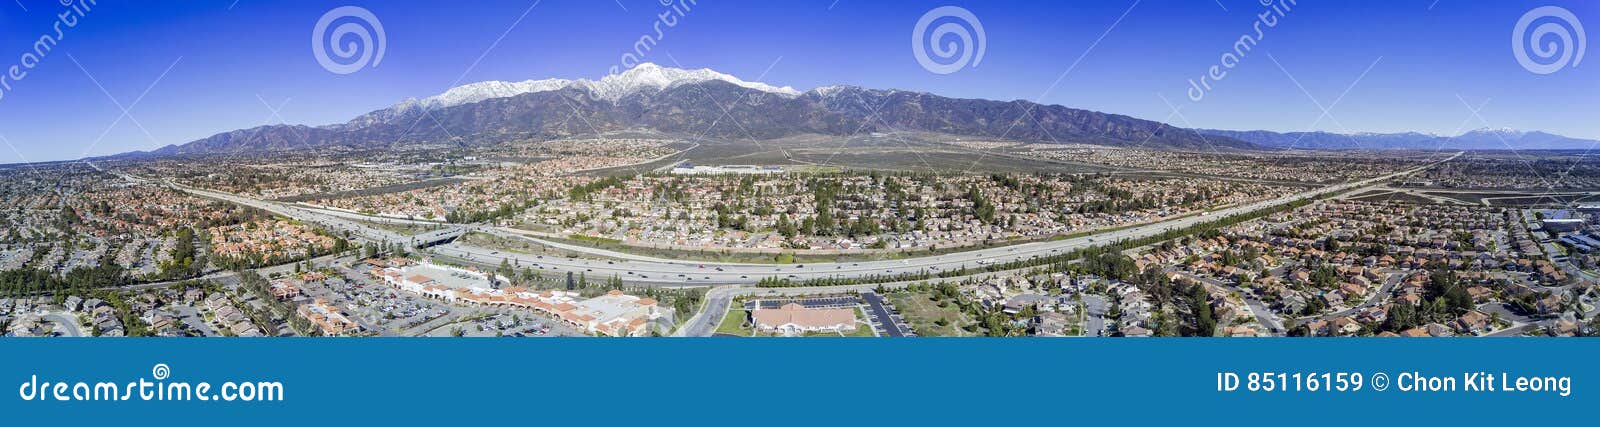 aerial view of rancho cucamonga area